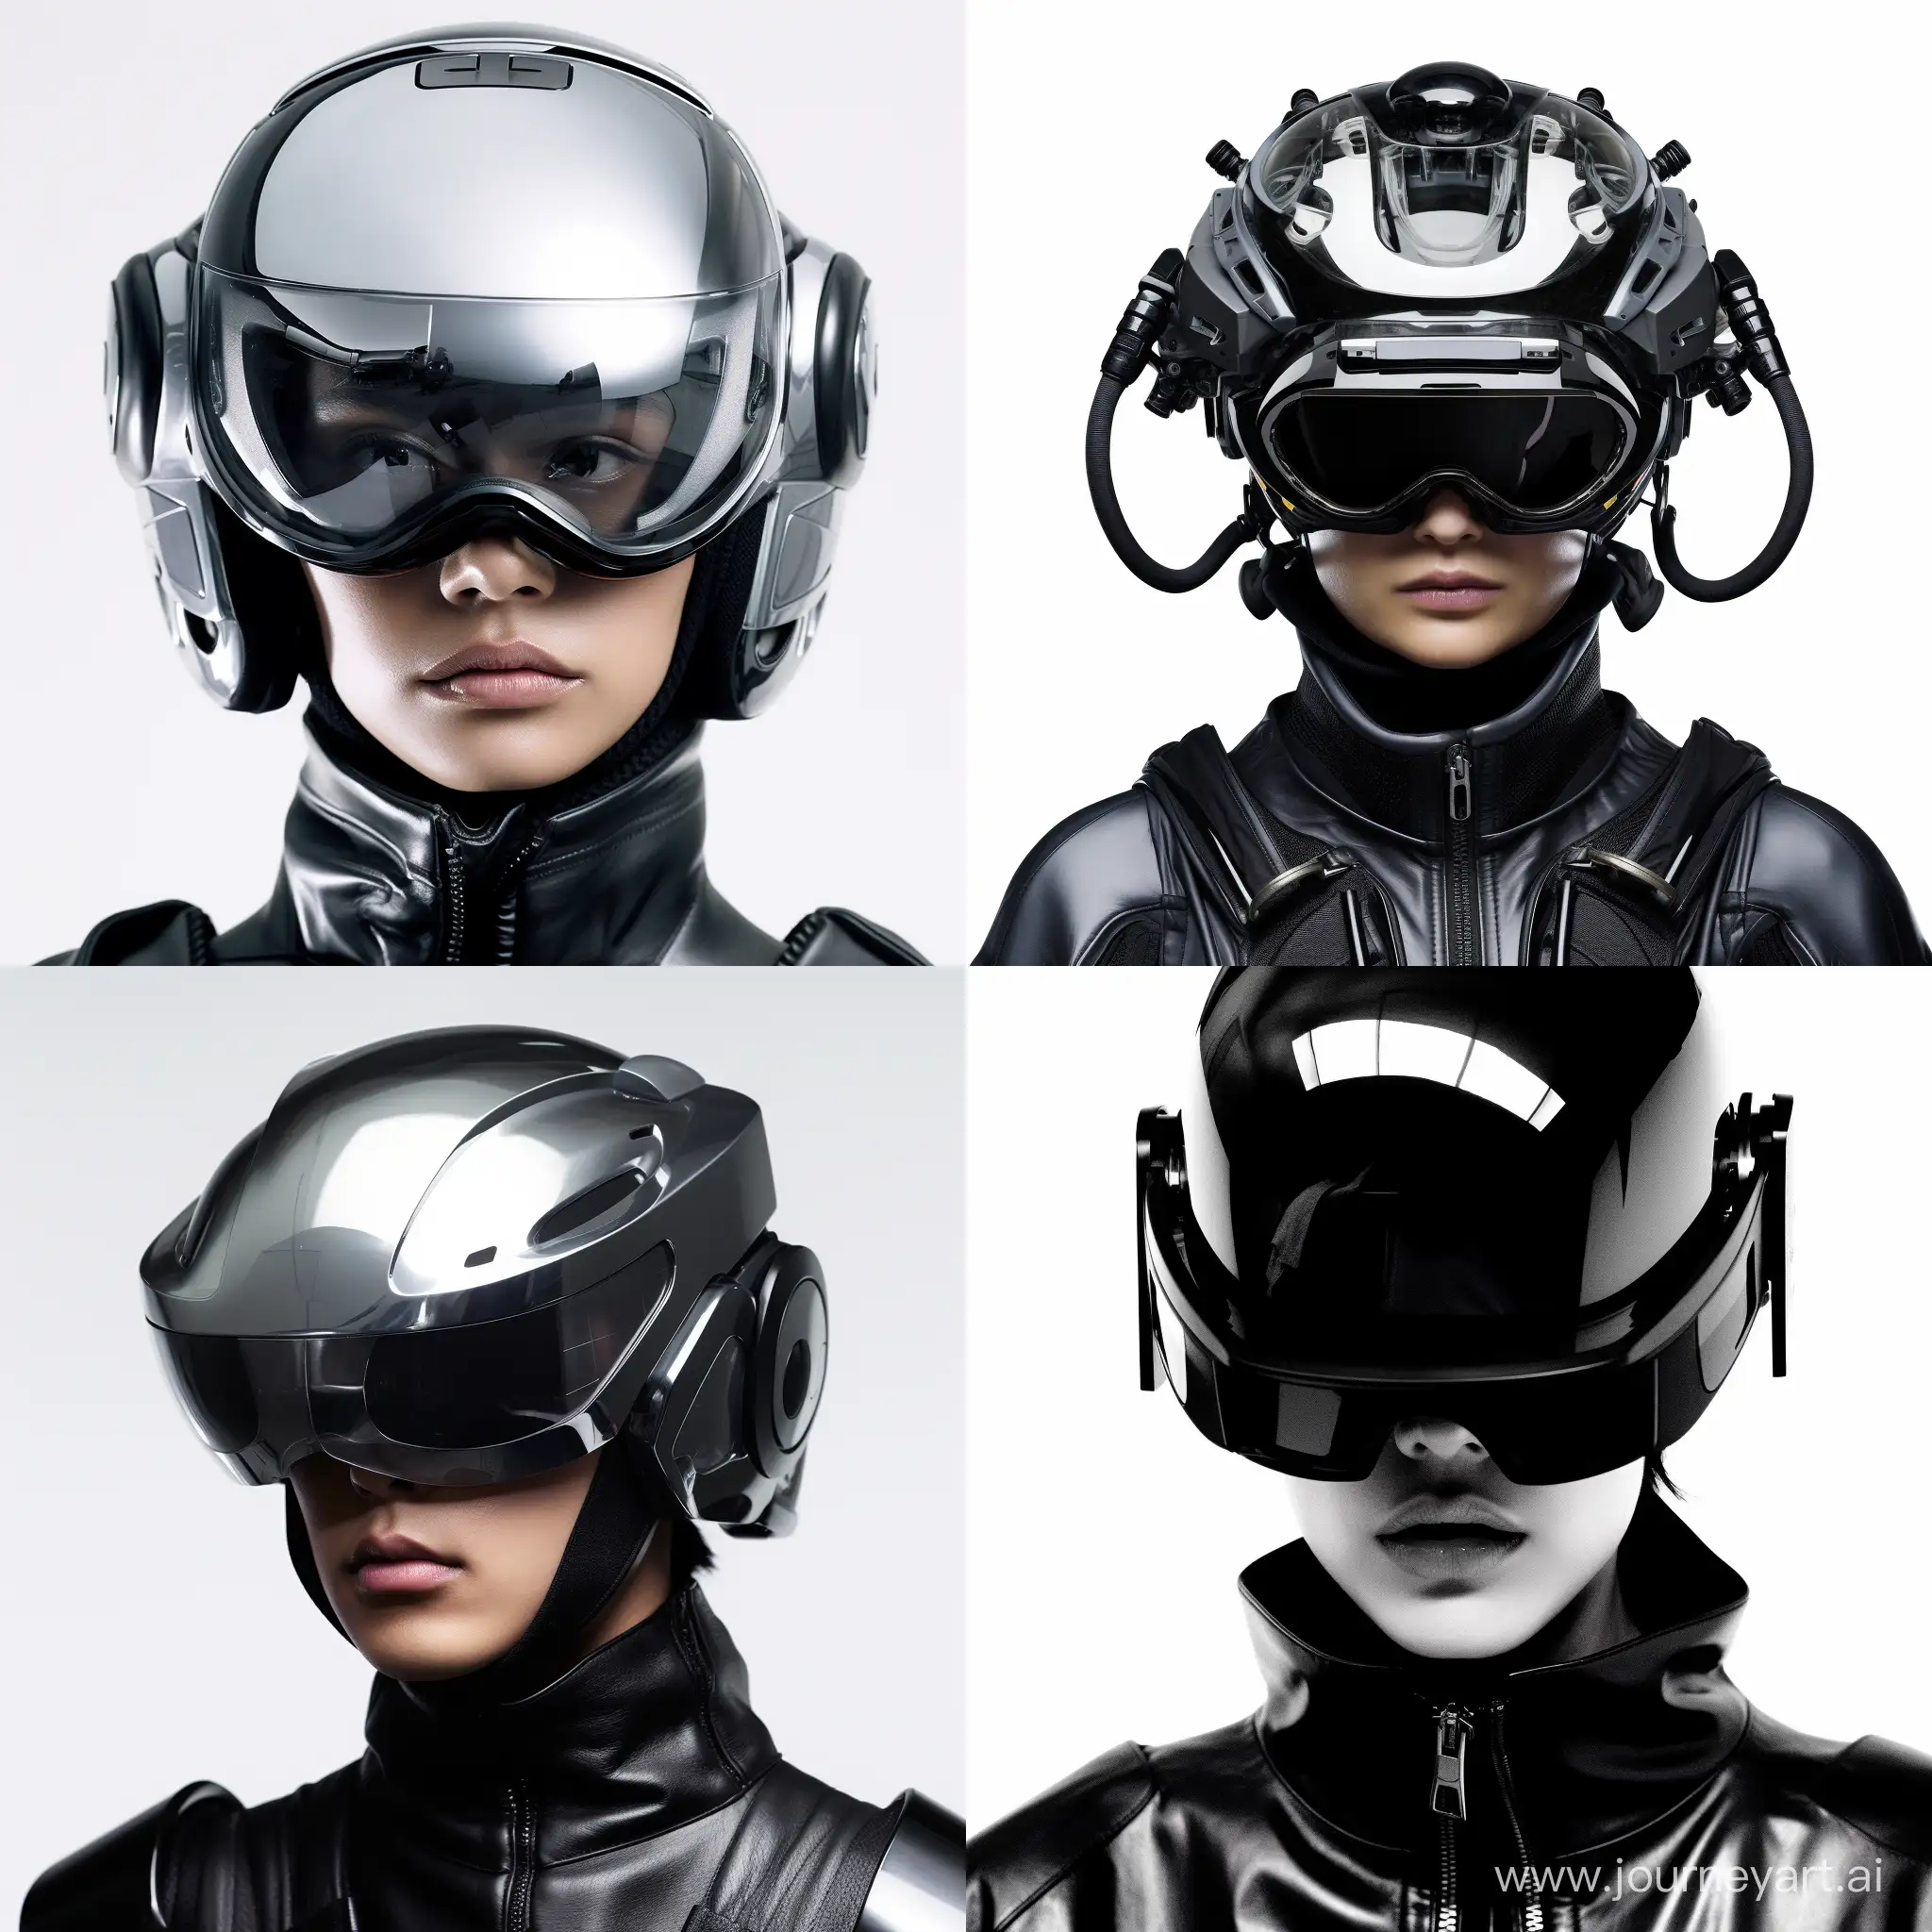  Imagine futur fashion photoshoot on white background , precision in design, a man in dark, voluminous, futuristic clothes, in an ultra-technological high-tech helmet with a large dark tinted visor, anamorphic lens, ultra realistic, hyber detailed, fashioncore, modelcore, portrait photo captured Mario Testino. use sony a7 II camera with an 30mm lens fat F.1.2 aperture setting to blur the background and isolate the subject. use distinctive lighting on the subject’s shot. The image should be shot in ultra-high resolution. Use the Midjourney v5 with photorealism mode turned on to create an ultra-realistic image, 8k, --ar 1:1 --v 5.1